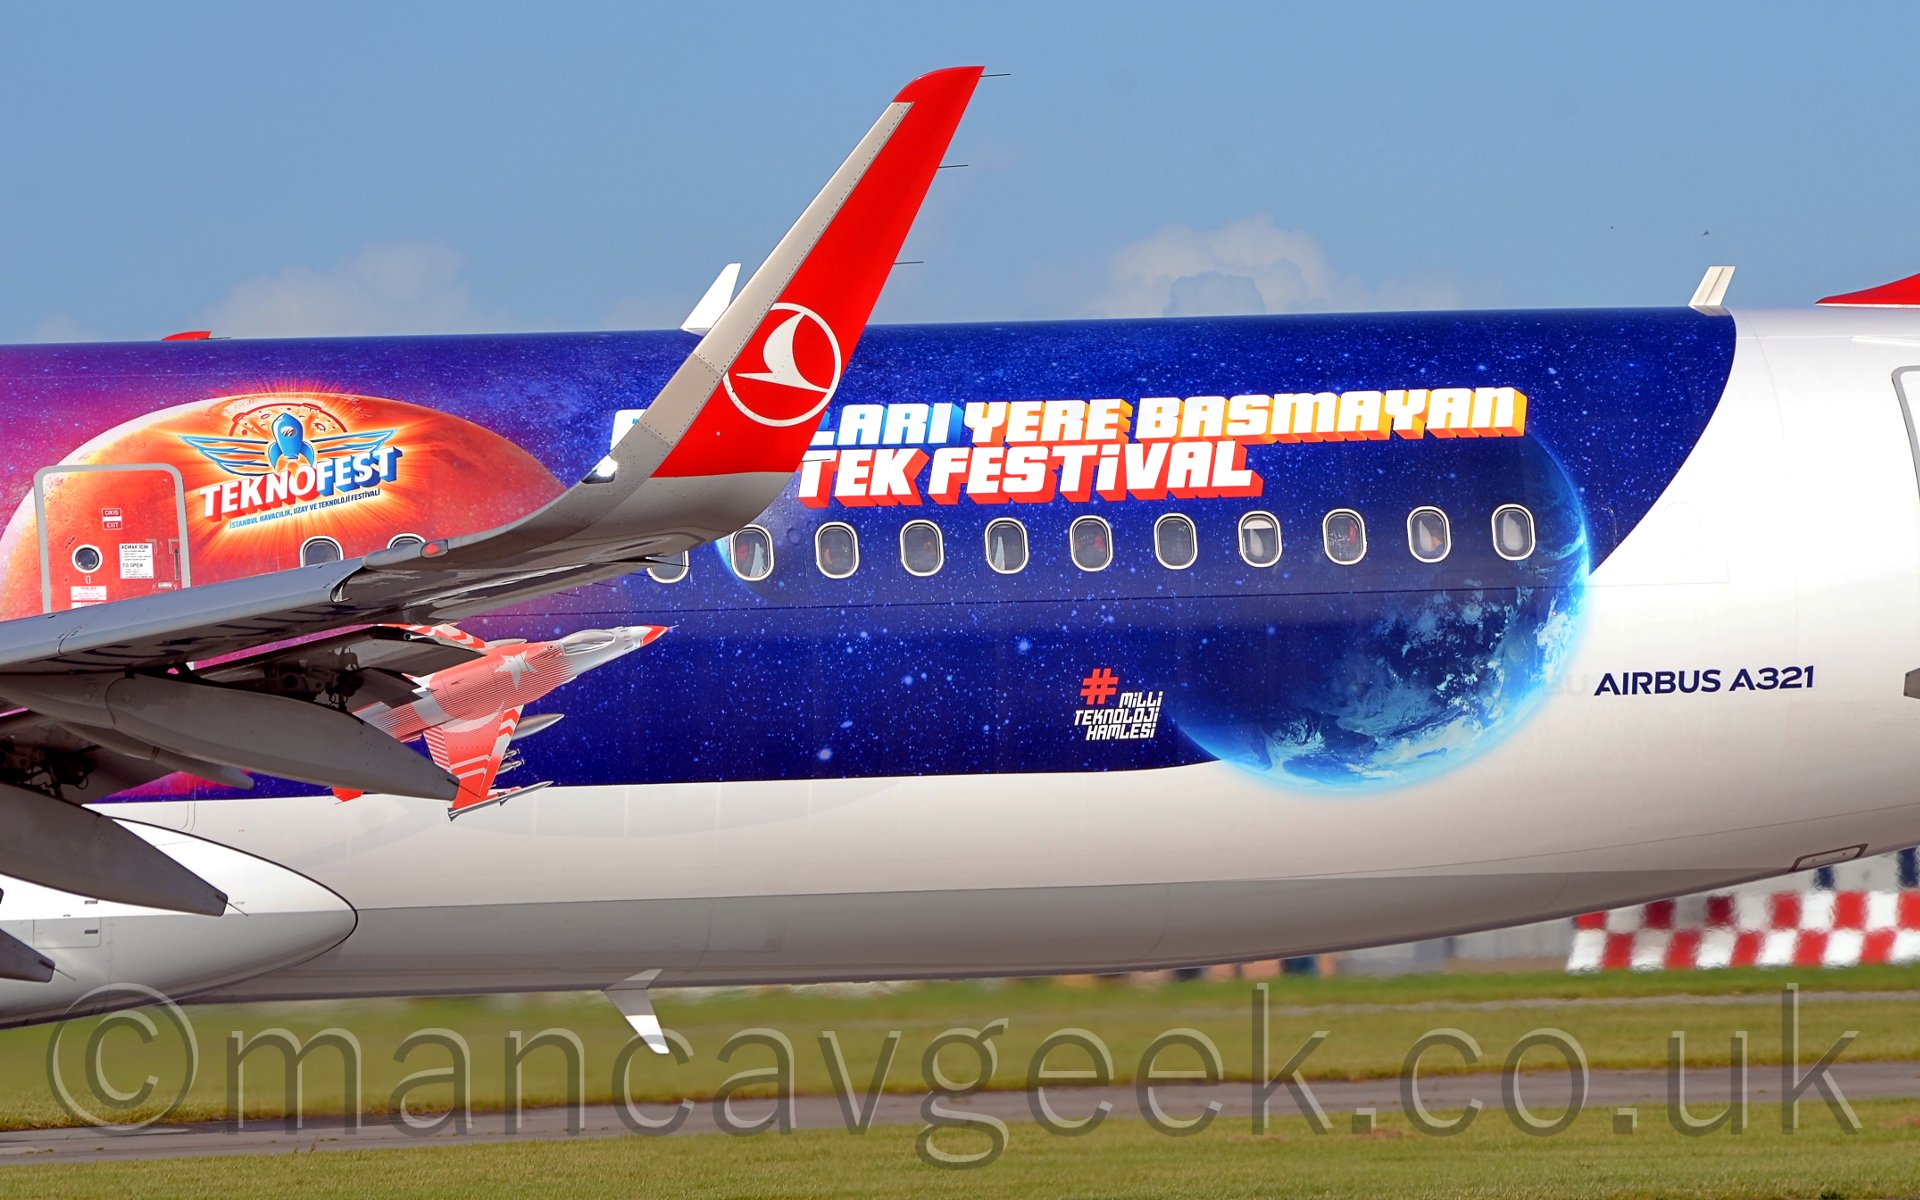 Closeup of the red and white upturnedwingtip of a twin engined jet airliner, with the white and blue rear fuselage behind it advertising a festival in Turkey, under a pale blue sky.